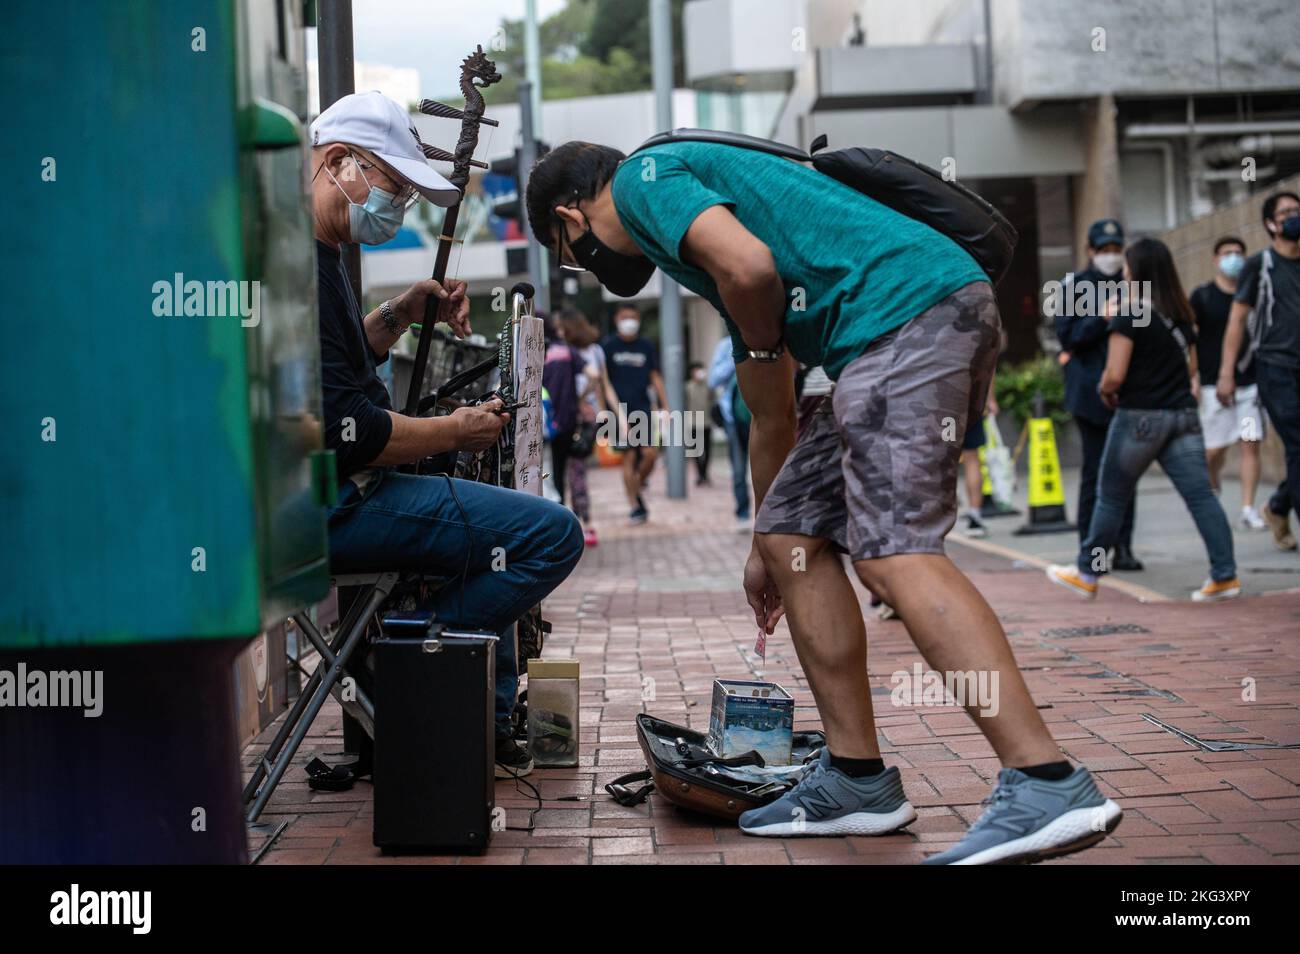 A man offers money to a musician playing 'Glory to Hong Kong' and 'Do You Here The People Sing?' on an erhu in front of Quarry Bay Station in Hong Kong. 'Glory to Hong Kong', considered an unofficial anthem of the 2019 pro-democracy protests, has made headlines lately due to it being mistaken for the actual Chinese national anthem at multiple international rugby events. In Hong Kong, questions persist as to the legality of playing or performing this song in public under the National Security Law. (Photo by Ben Marans/SOPA Images/Sipa USA) Stock Photo